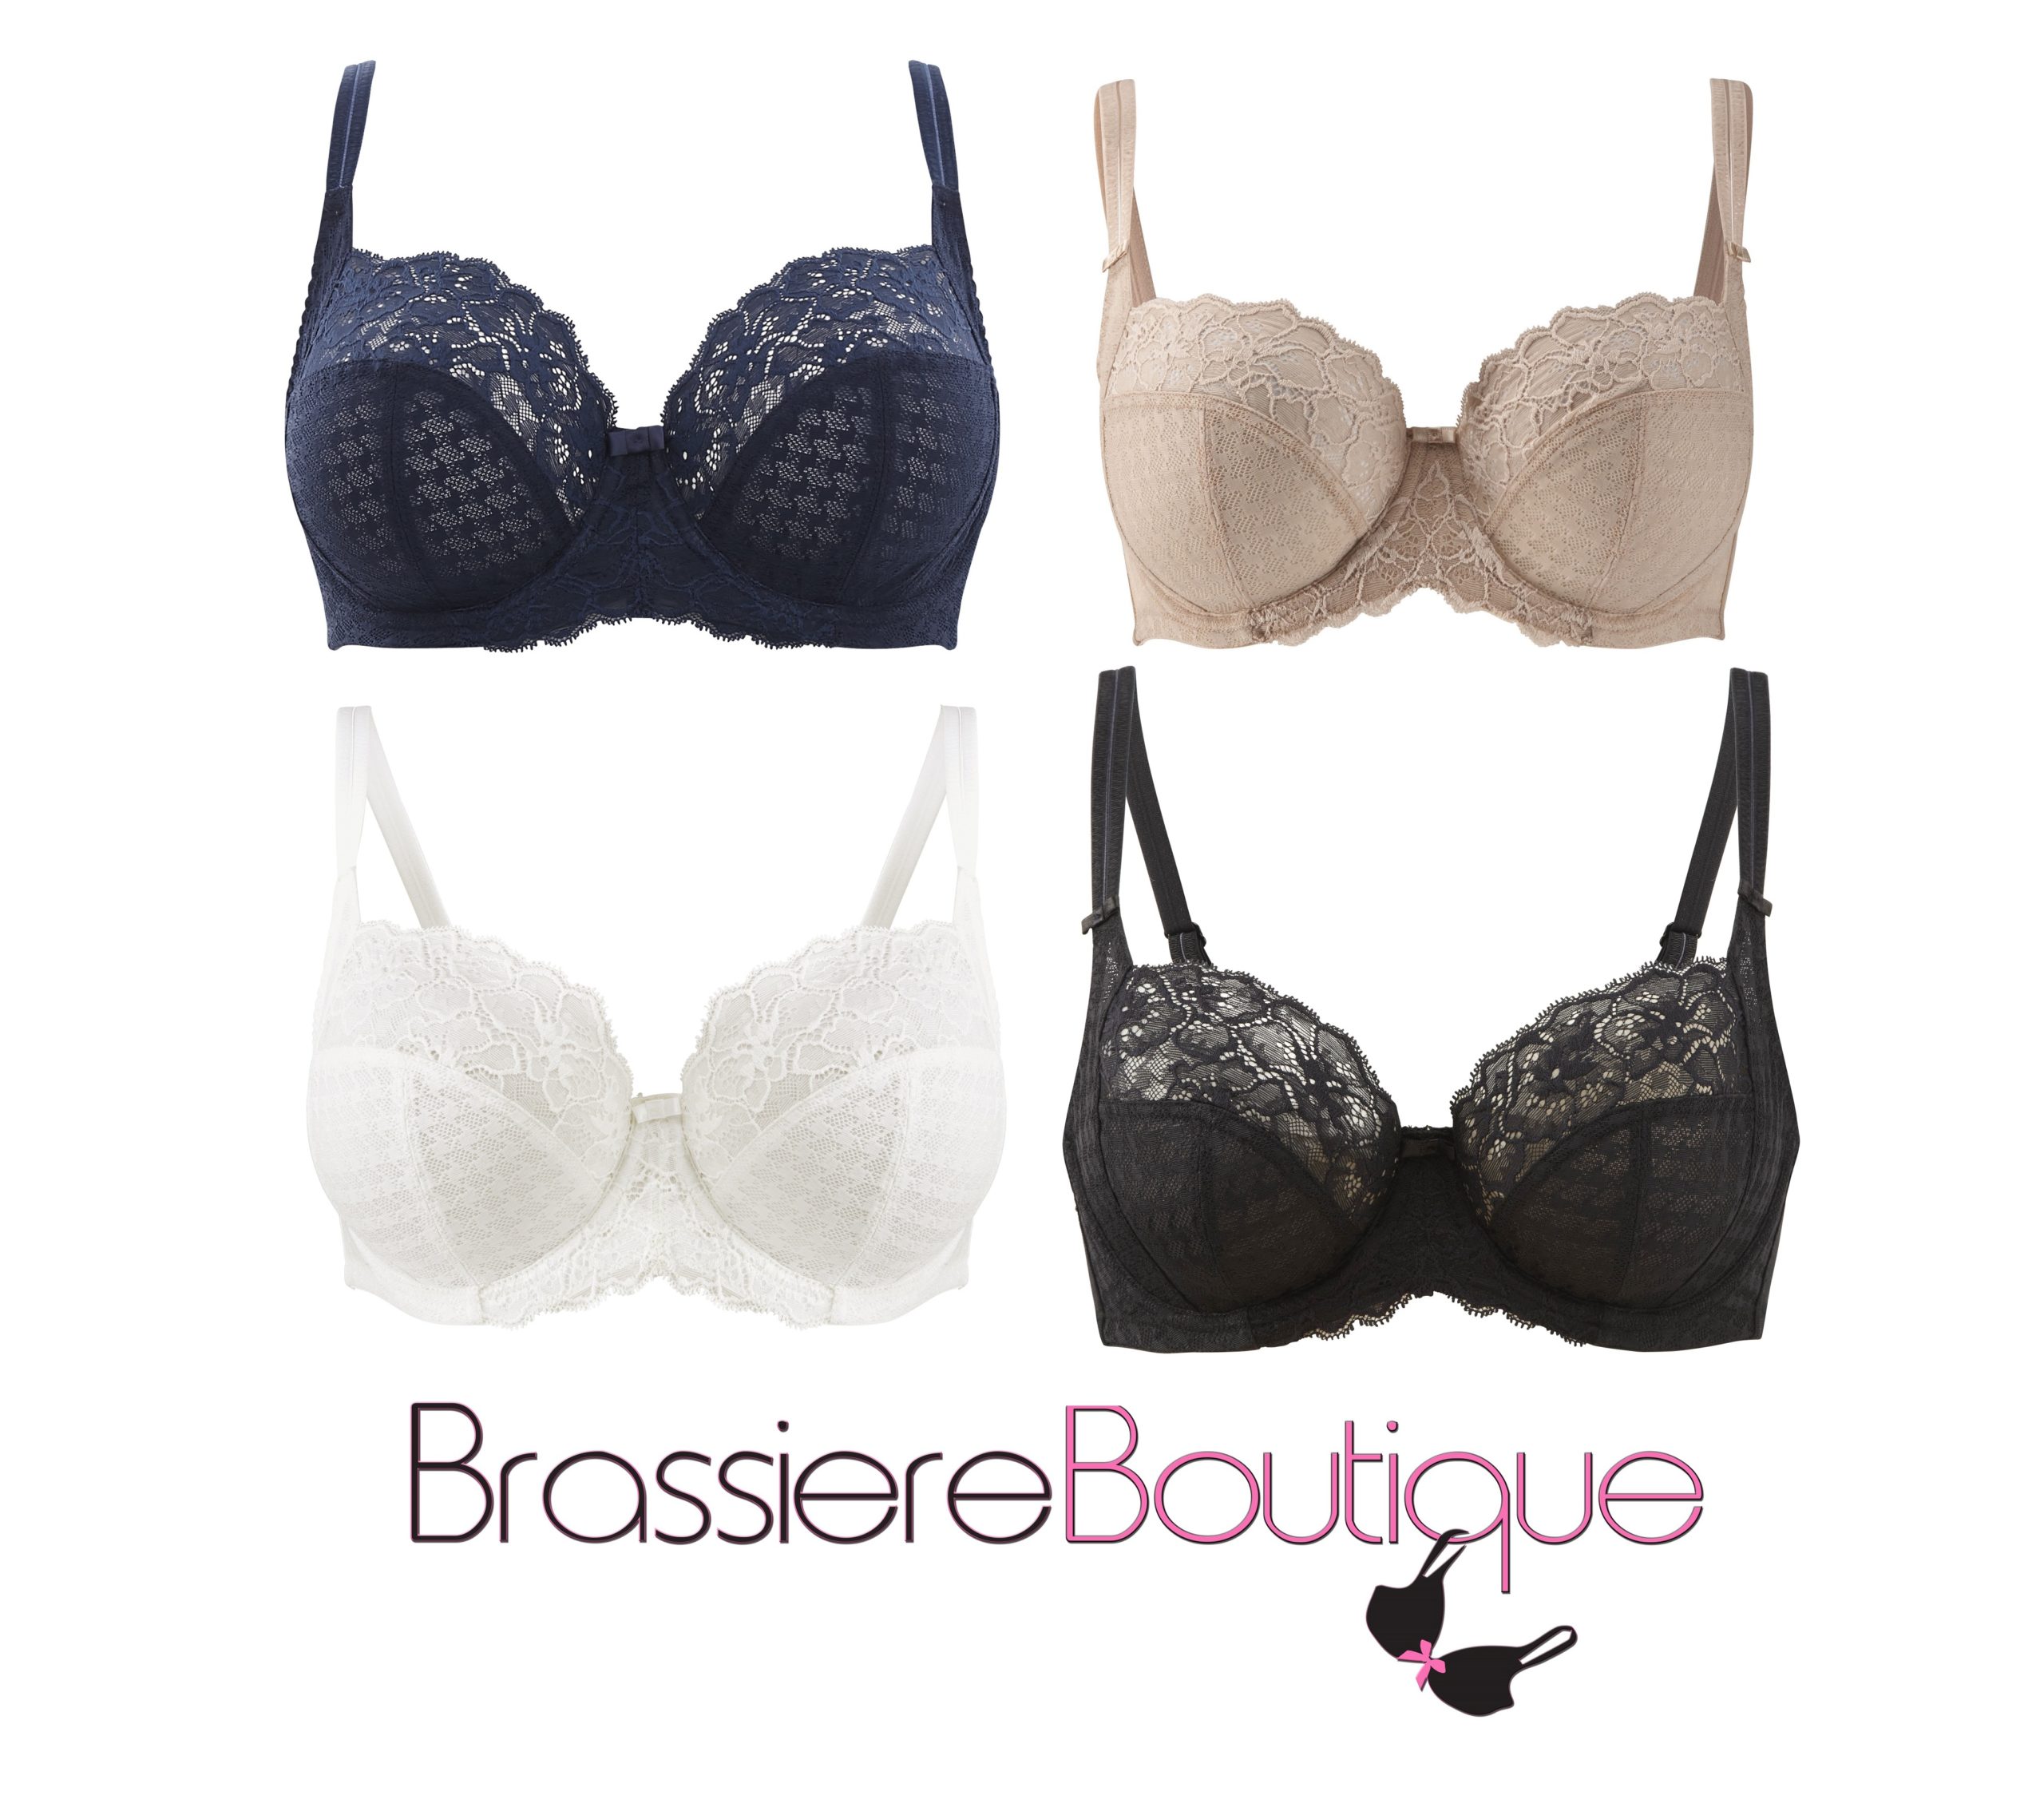 Envy Full Cup Lace Bra Ivory Support Feminine Sophistication: Shop Now